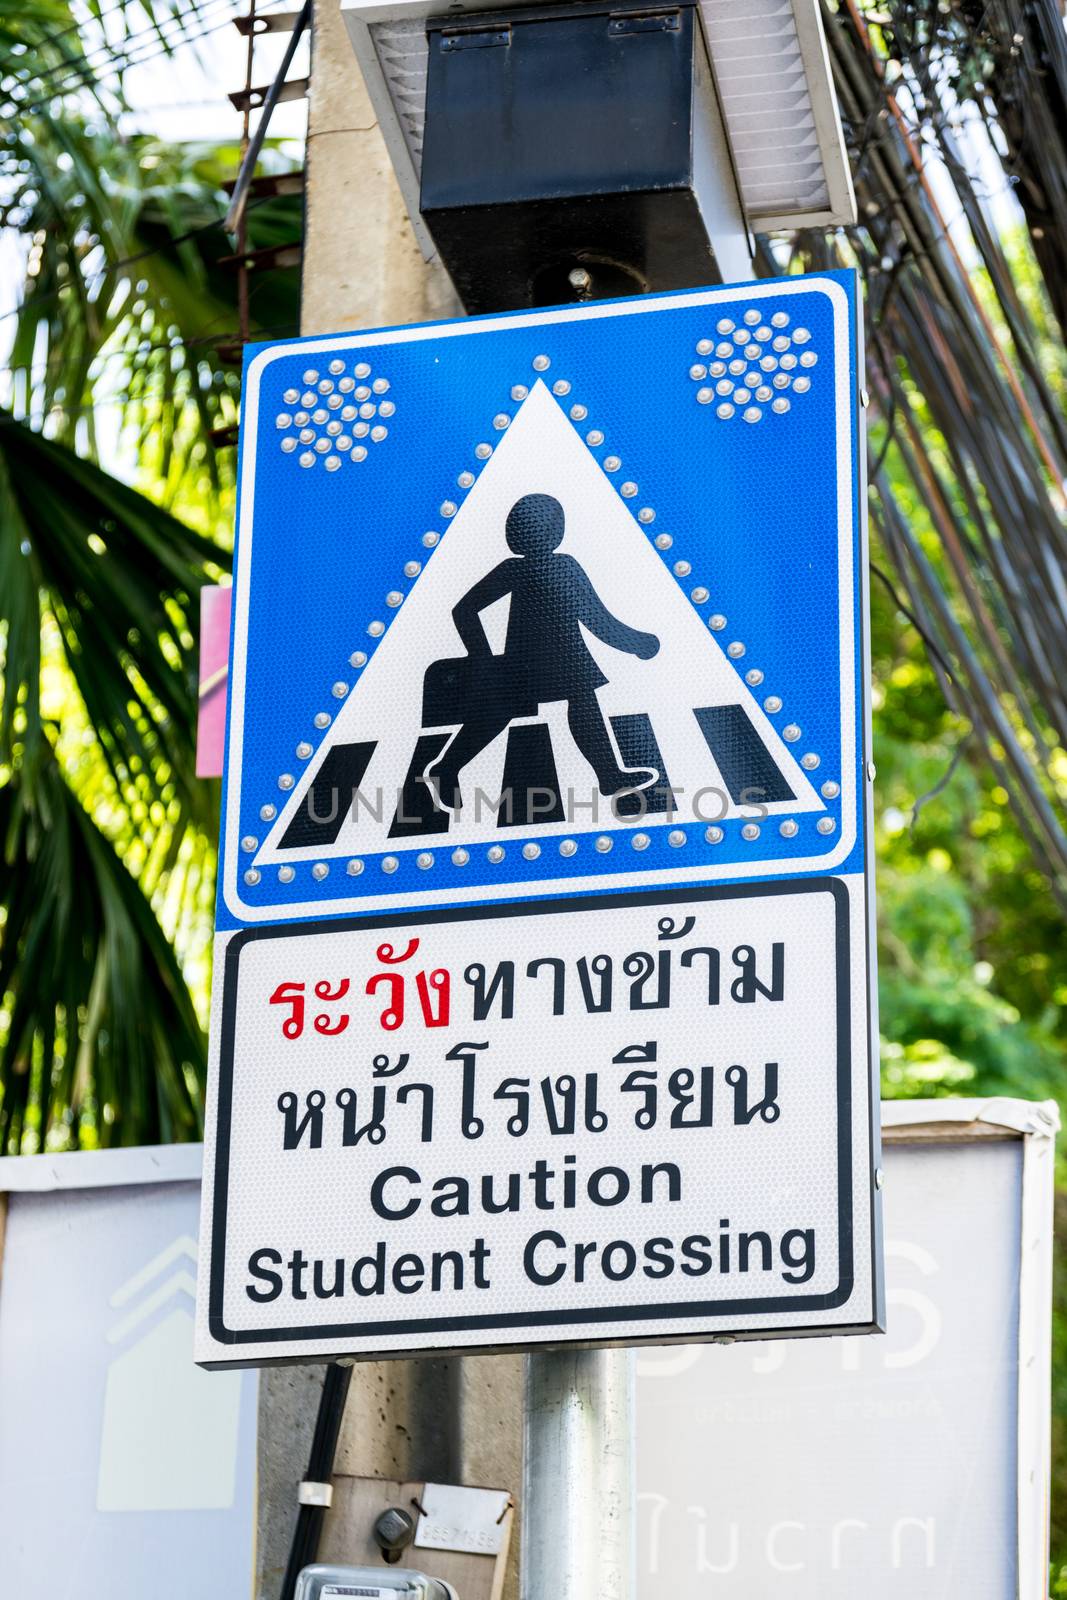 Caution student crossing signboards.